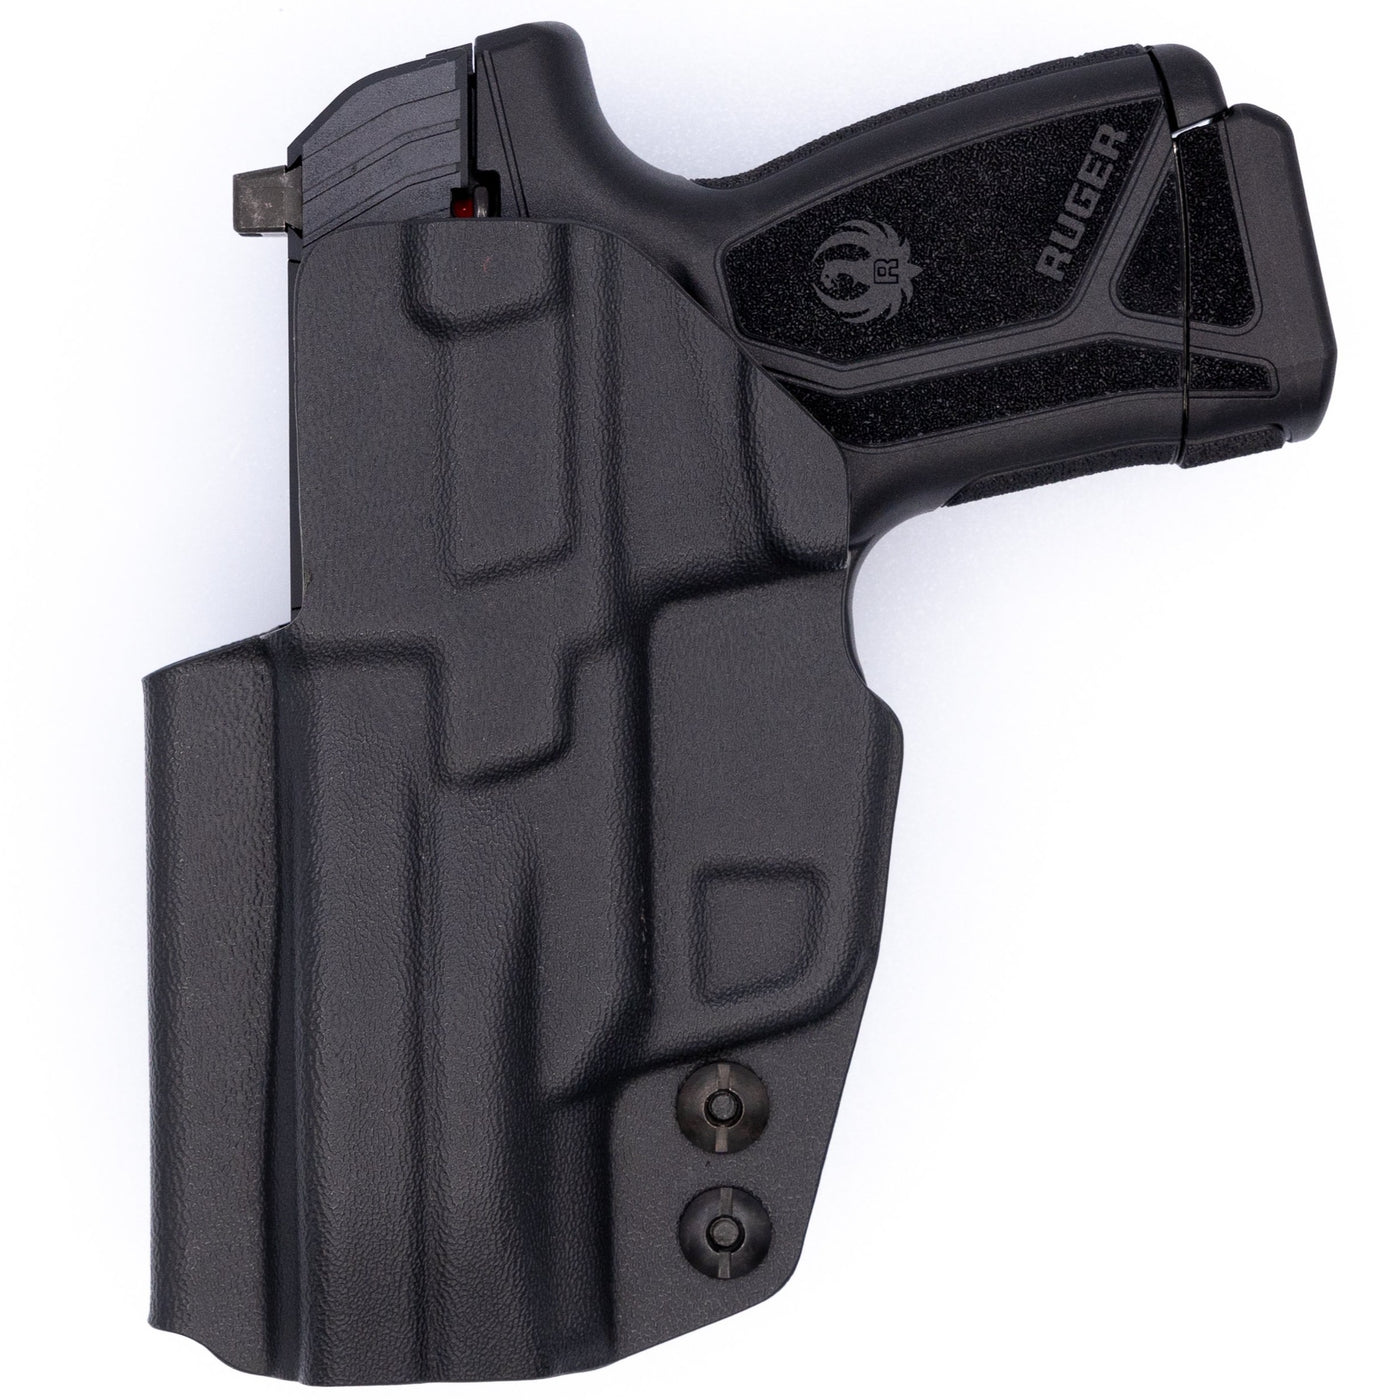 Shown is the custom C&G Holsters IWB inside the waistband Holster for the Ruger MAX9.